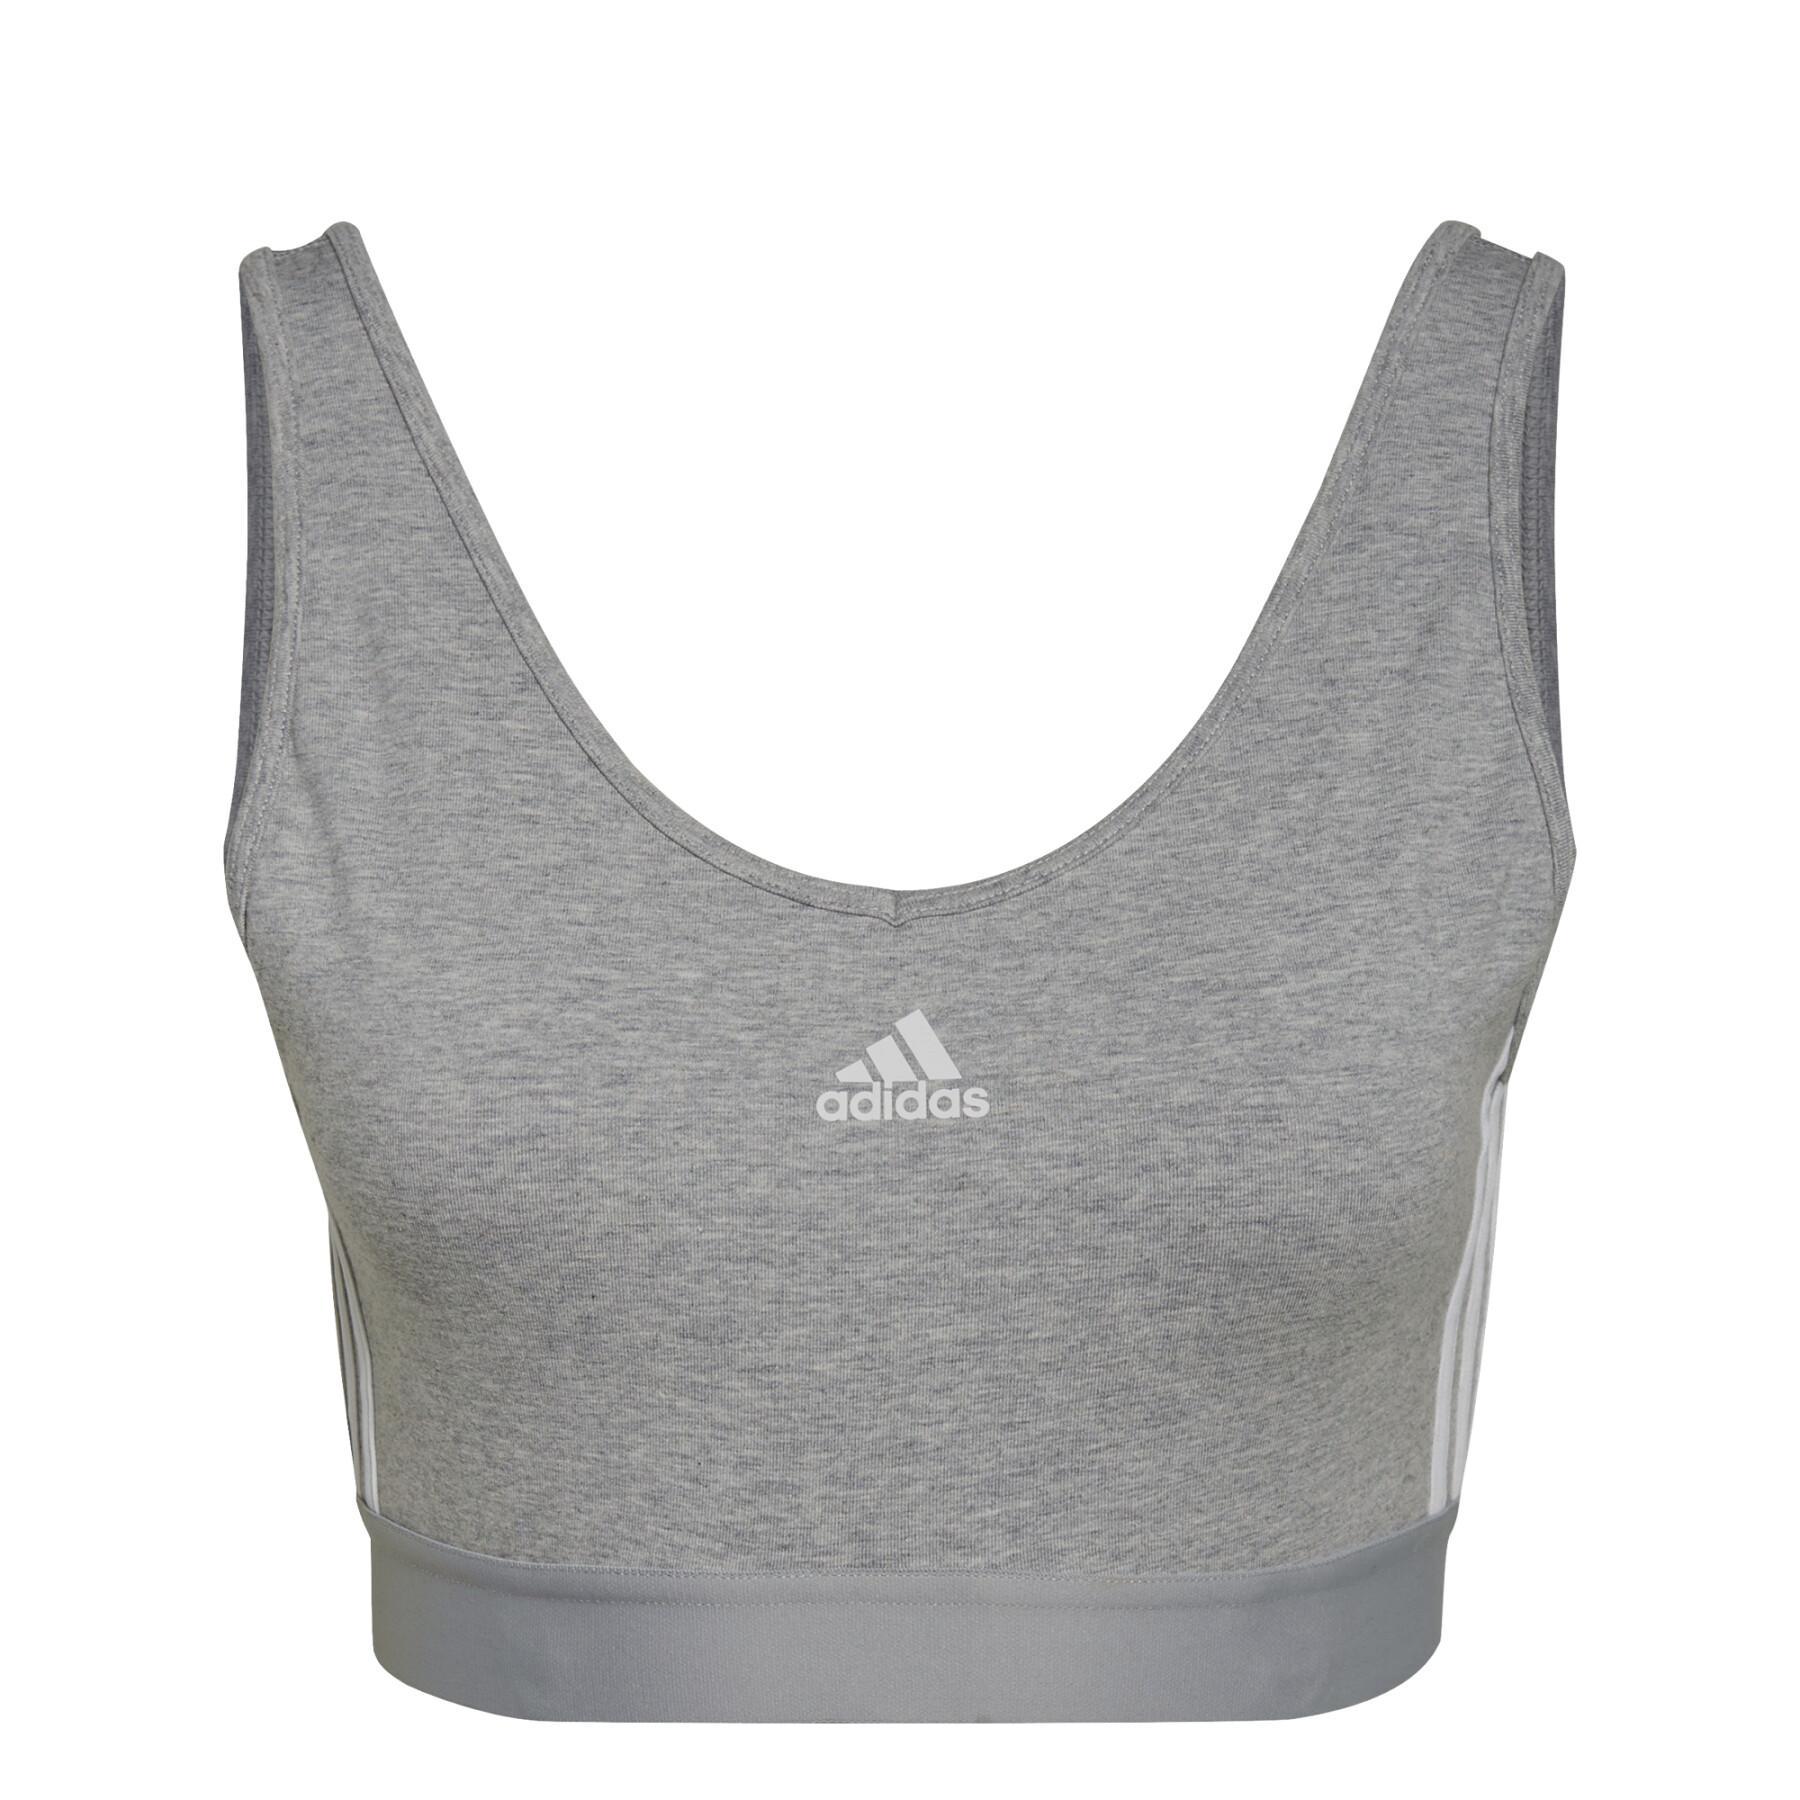 Buy ADIDAS Grey Solid Don't Rest Alphaskin Padded Training Sports